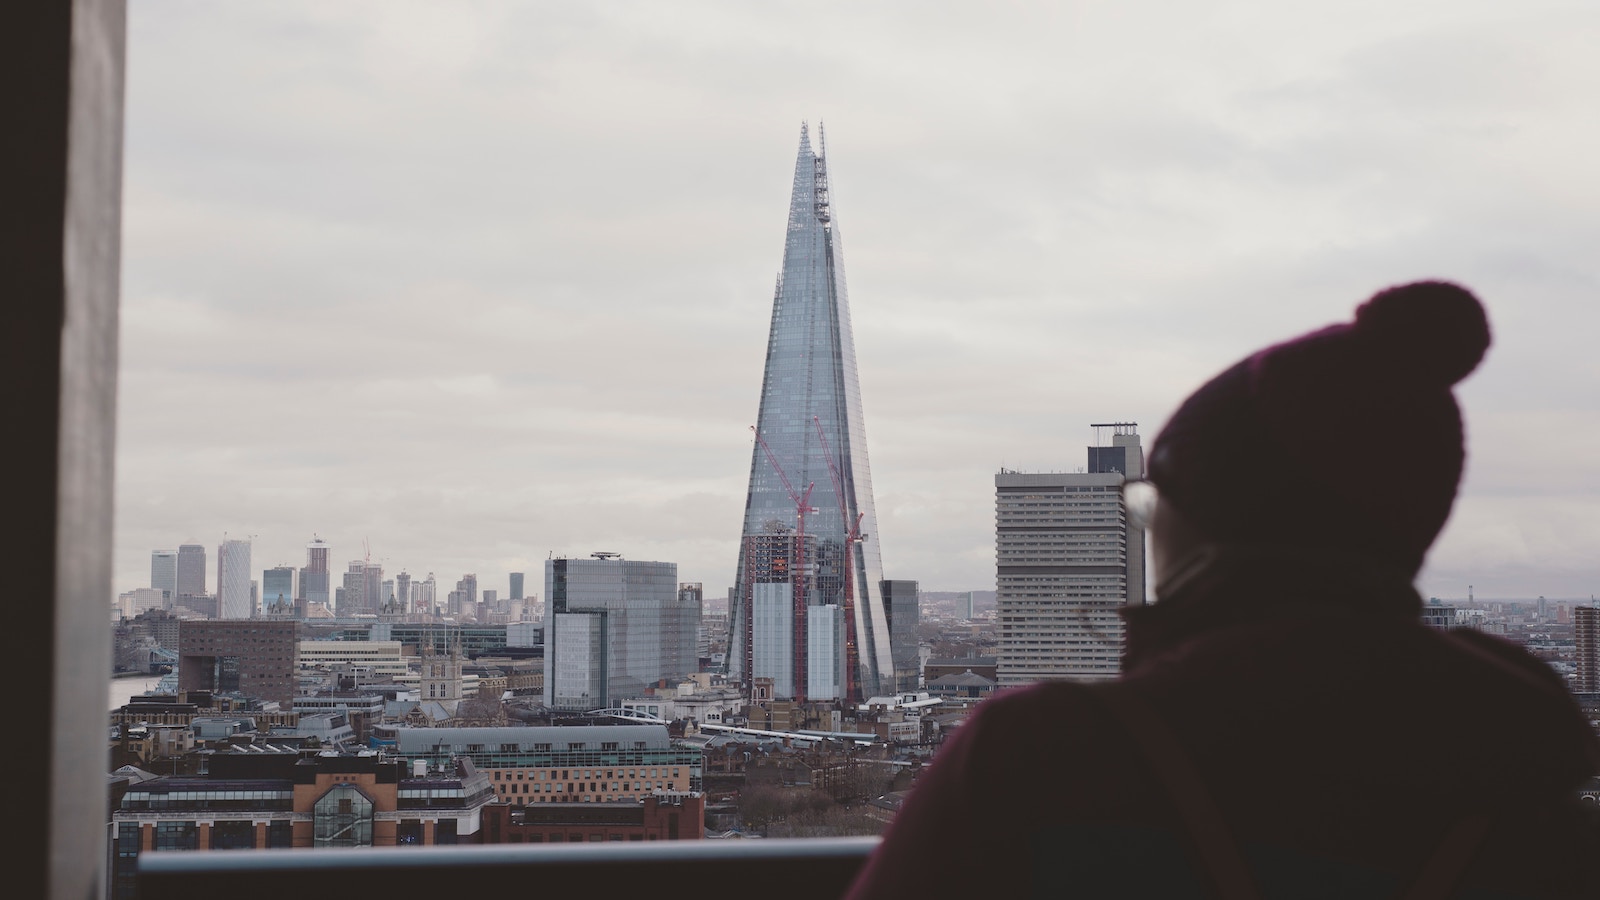 Learning People | The Shard with person in foreground